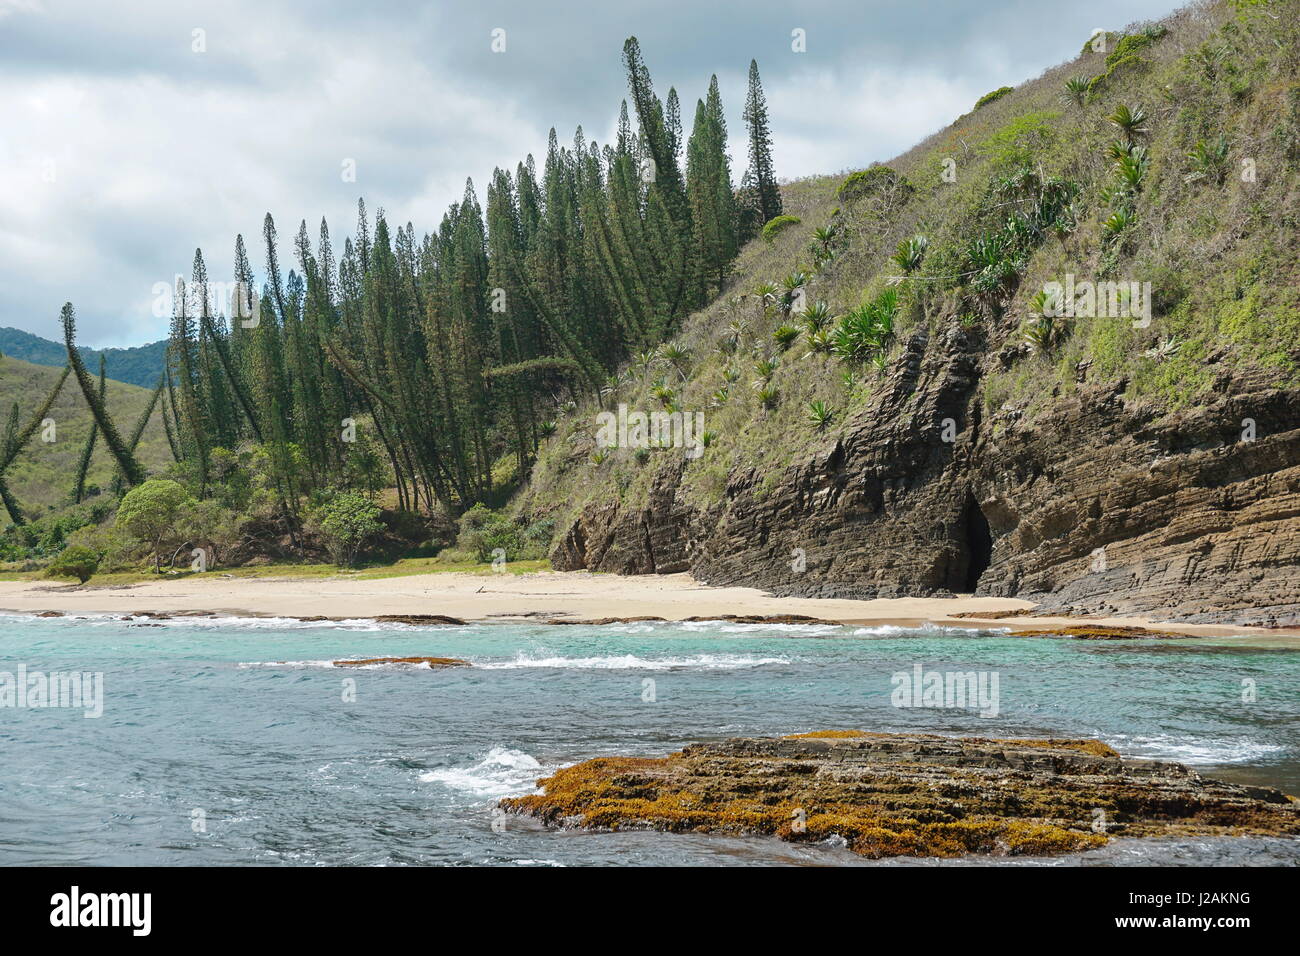 New Caledonia coastal landscape, cliff and beach with Araucaria pines in Turtle bay, Bourail, Grande Terre island, south Pacific Stock Photo